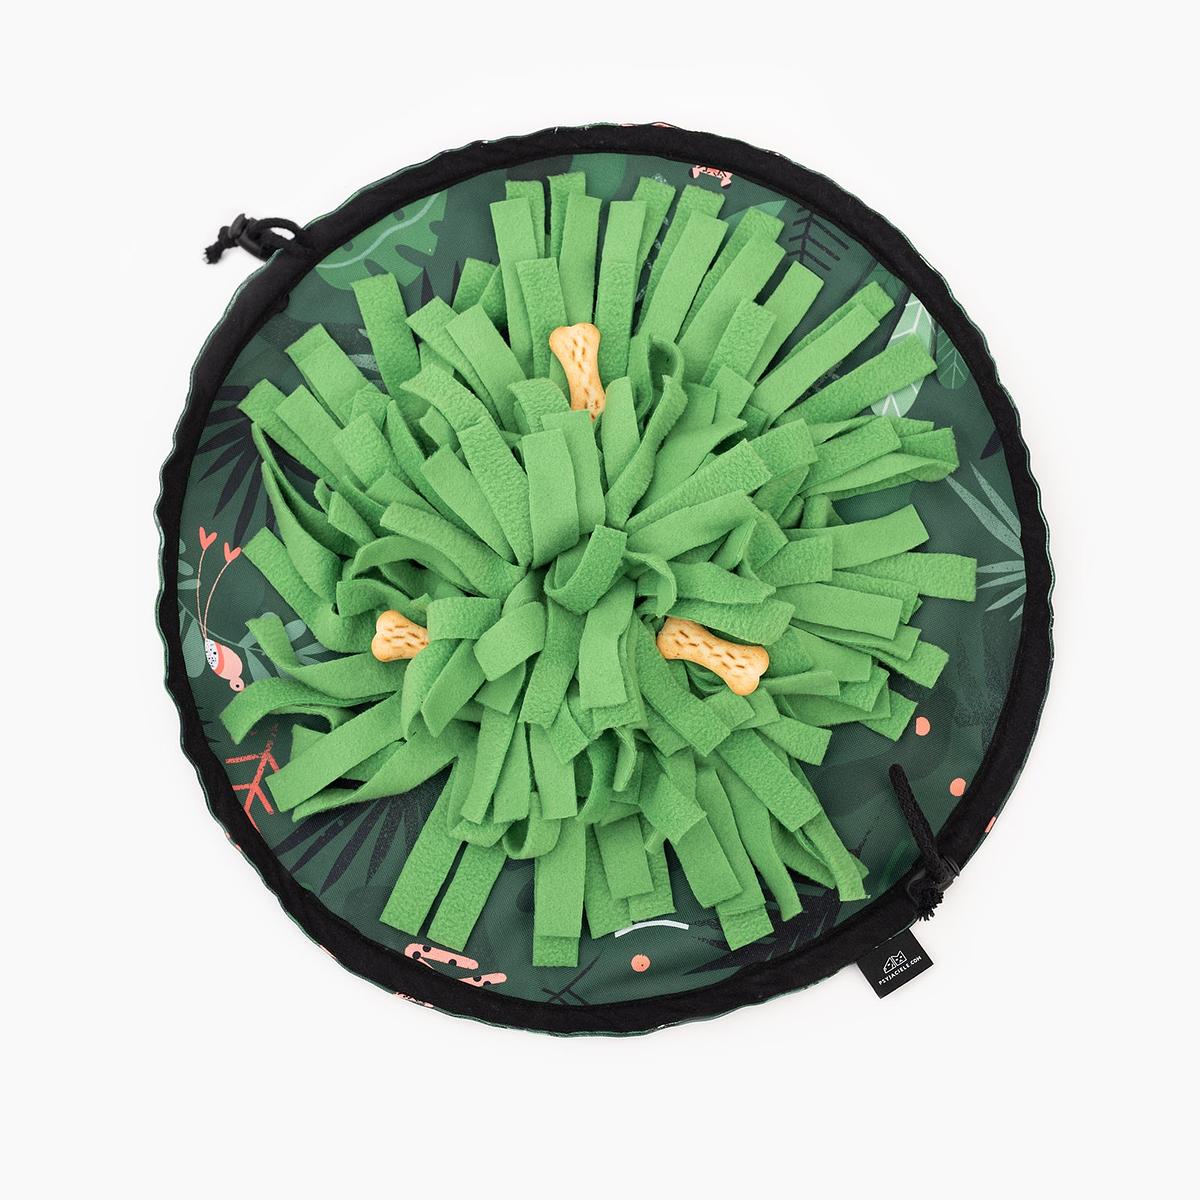 Portable Snuffle mat "Welcome to the jungle" 3 in 1